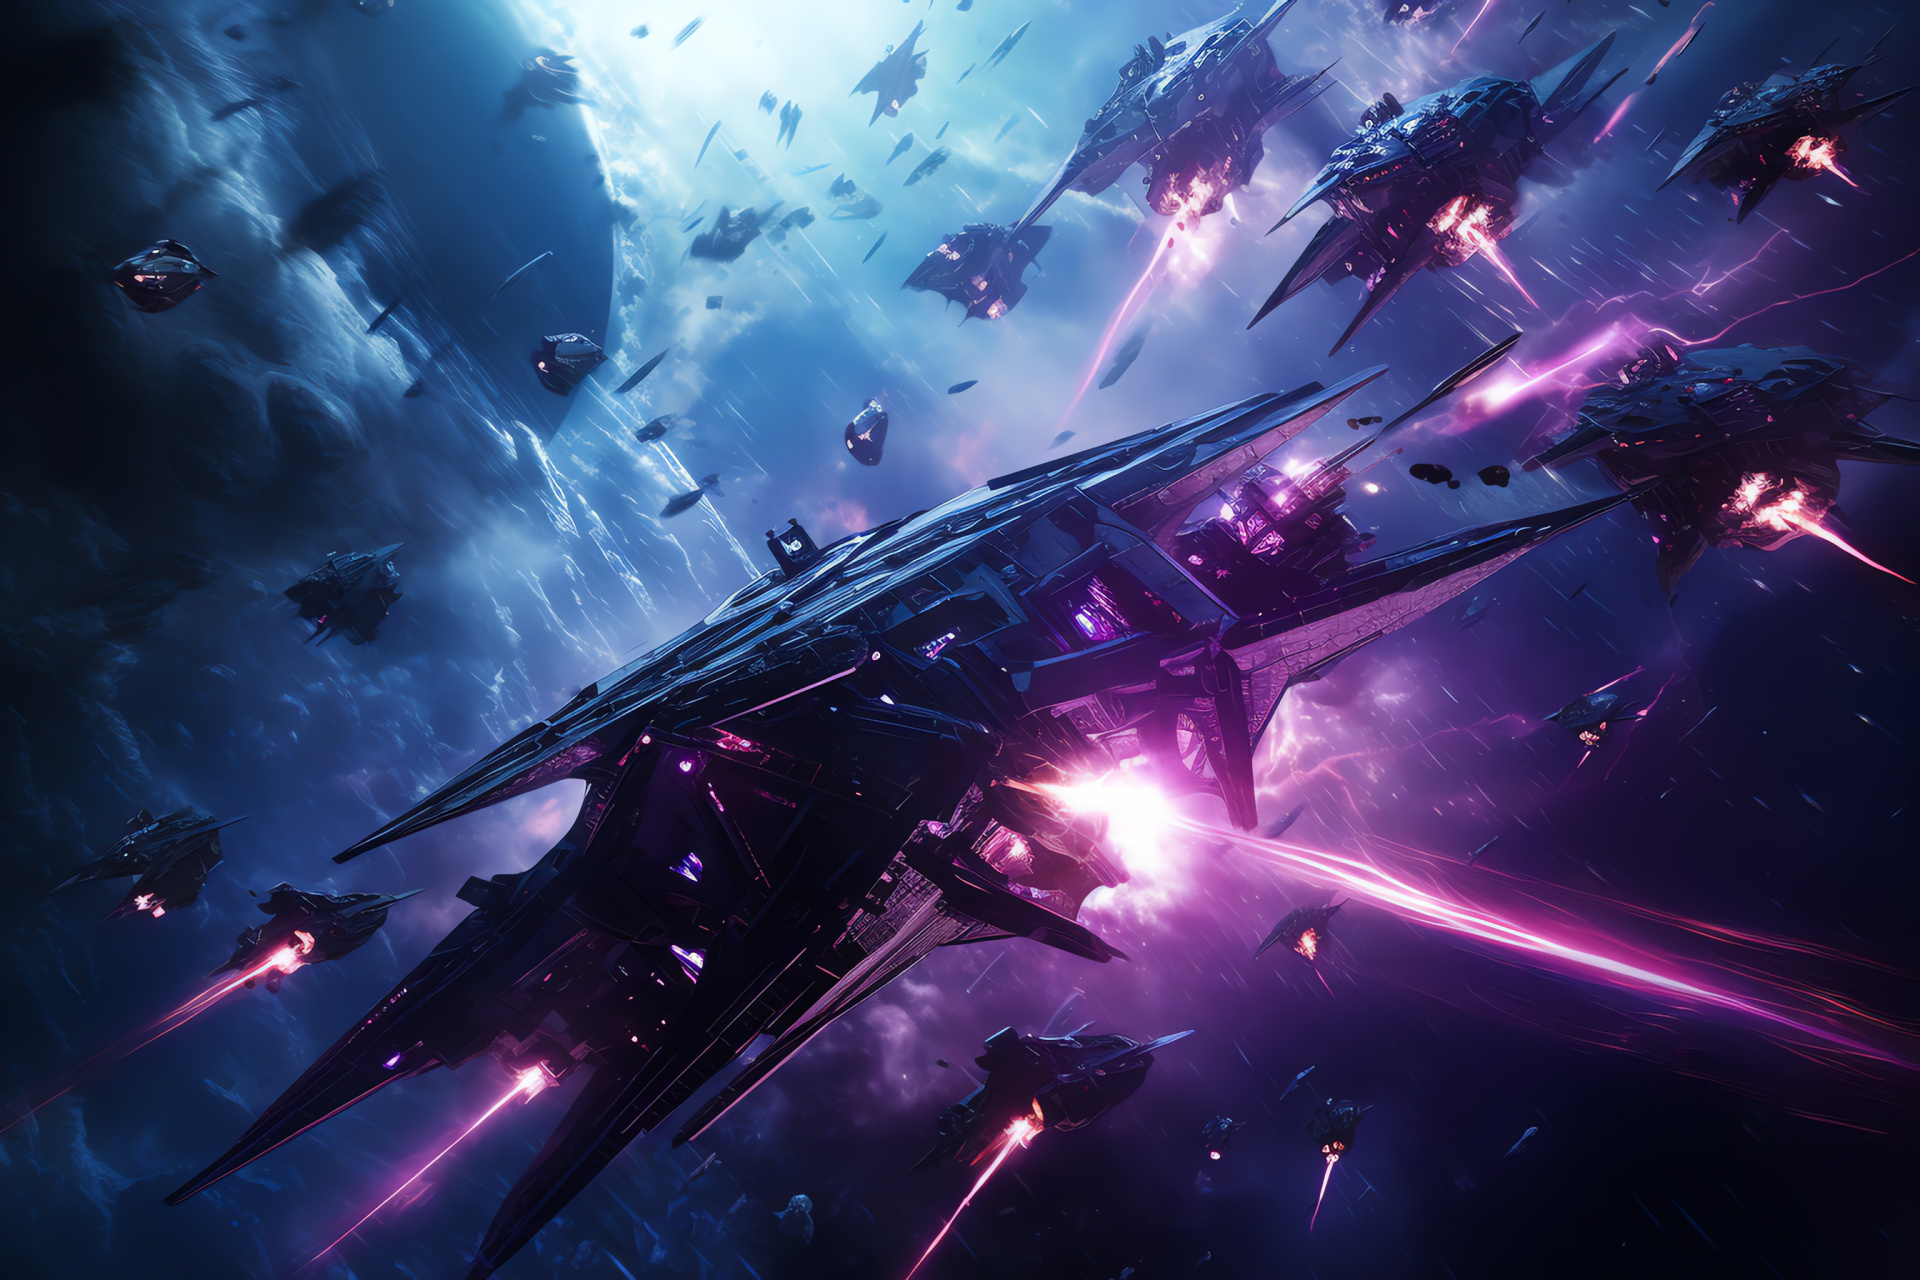 Stellar dogfight, Space pursuit, Purple and blue cosmos, Fighter squadron, Electric hues, HD Desktop Image